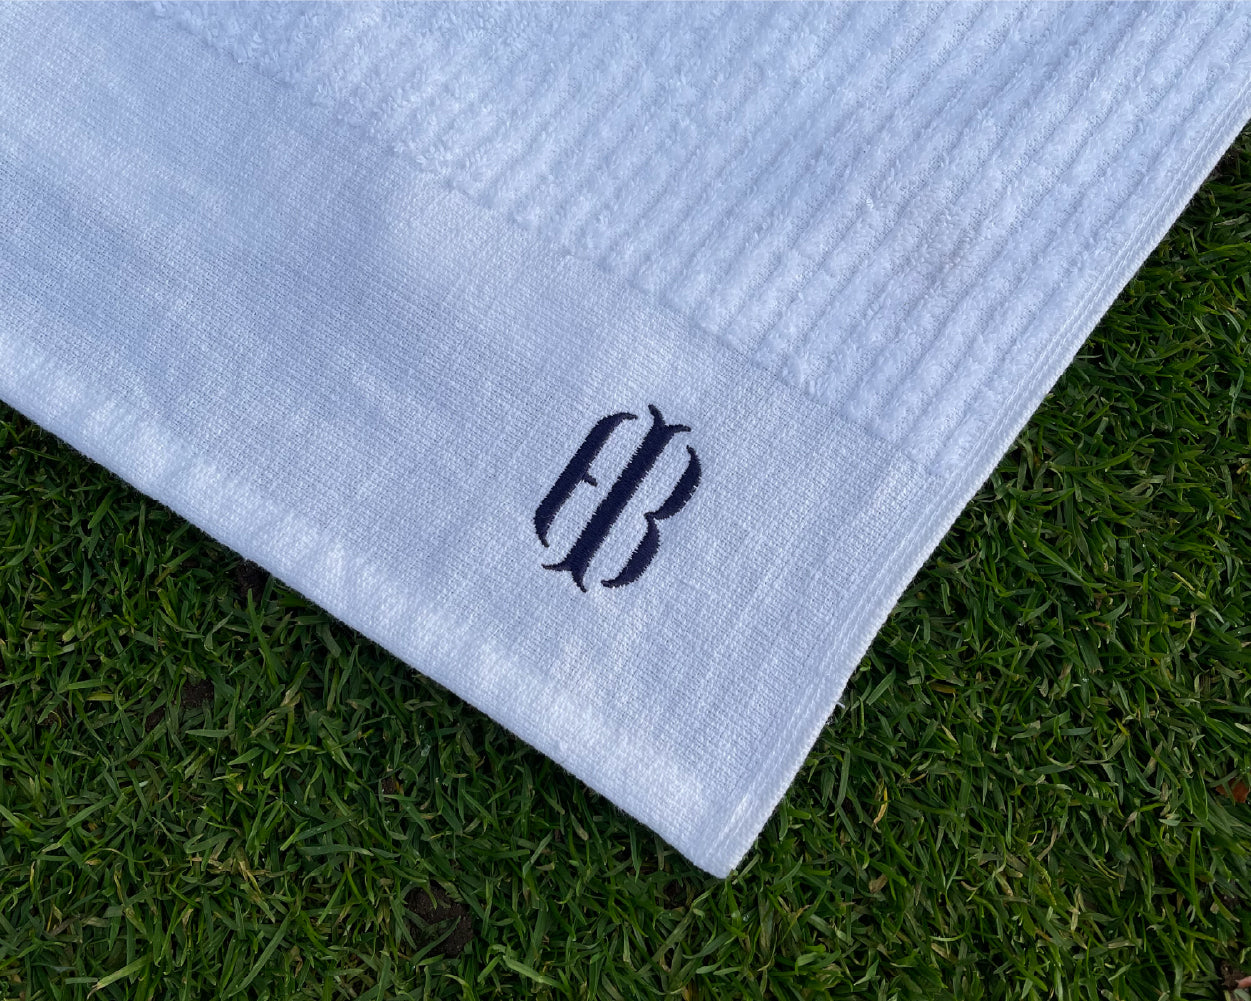 Close up on embroidered Holderness and Bourne logo on white and blue towel against grassy background